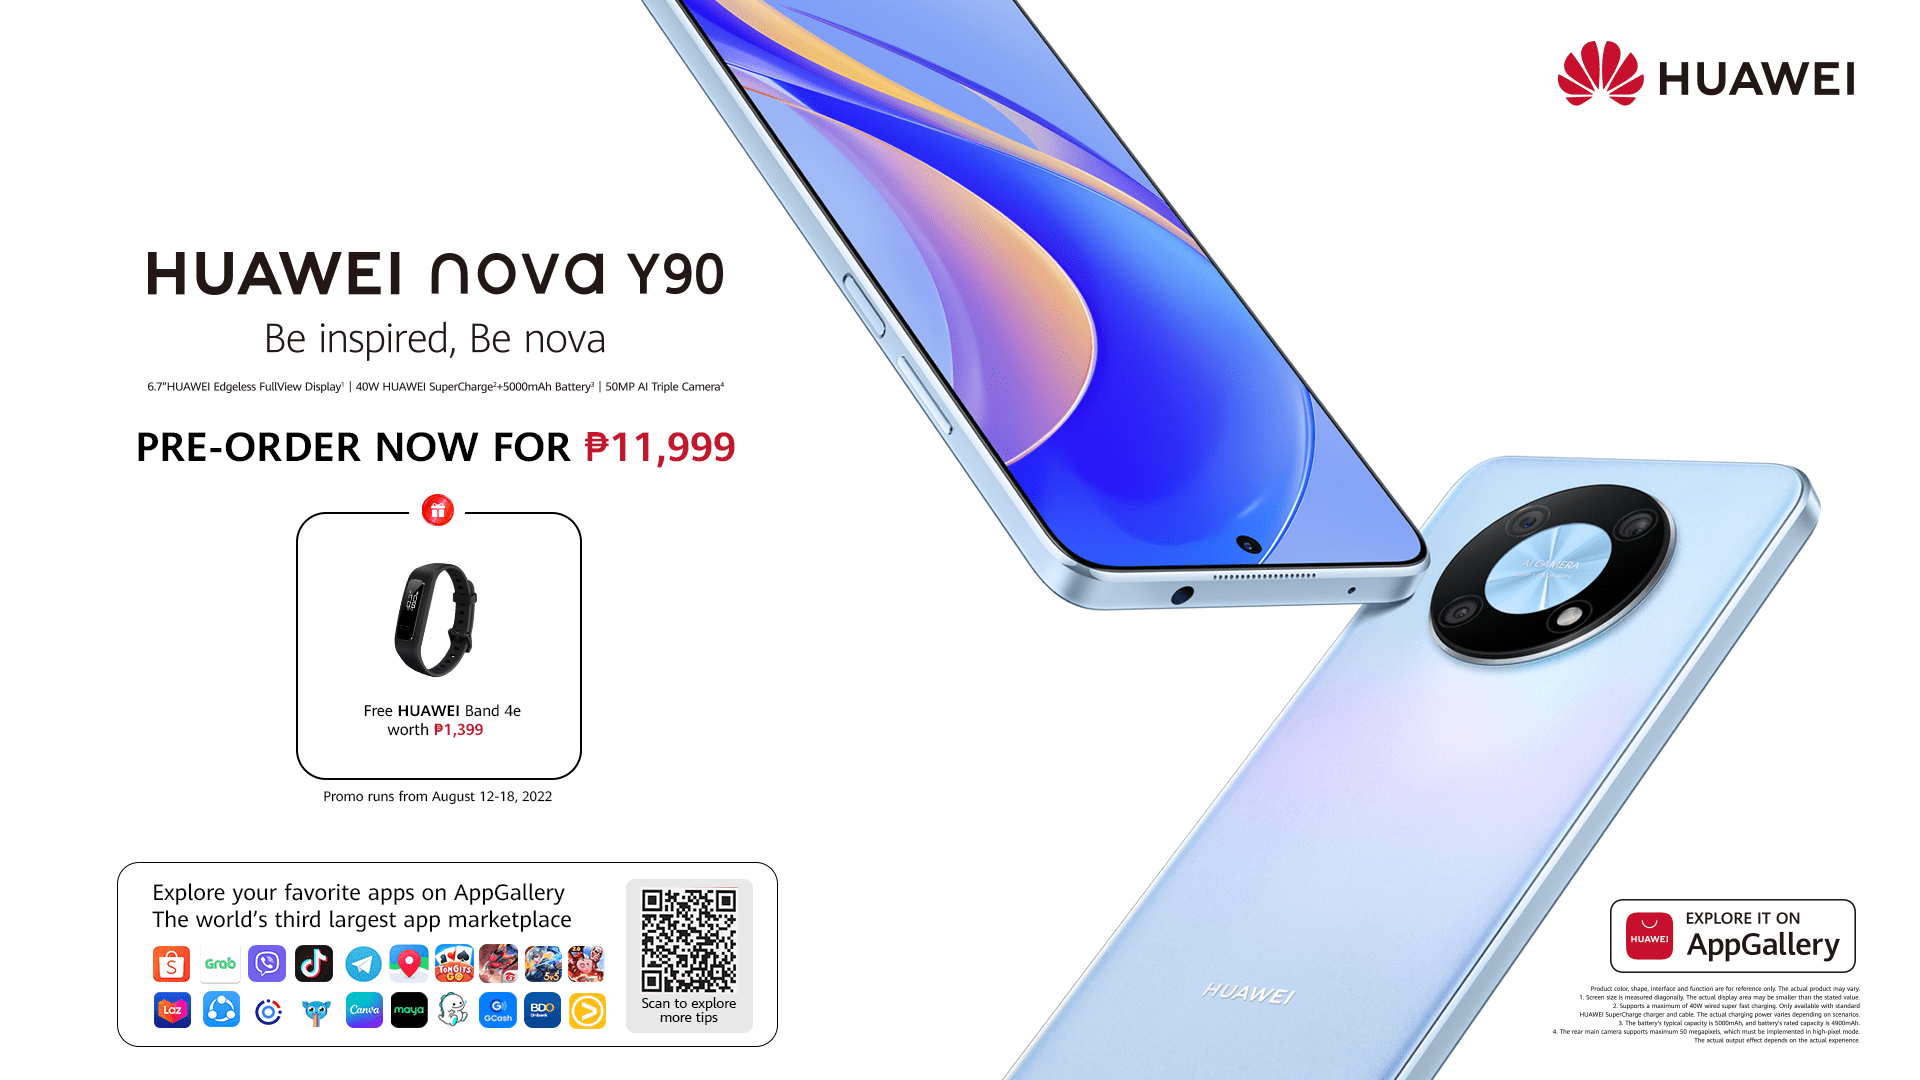 Nova Y90 Price and Preorder Details Announced by Huawei